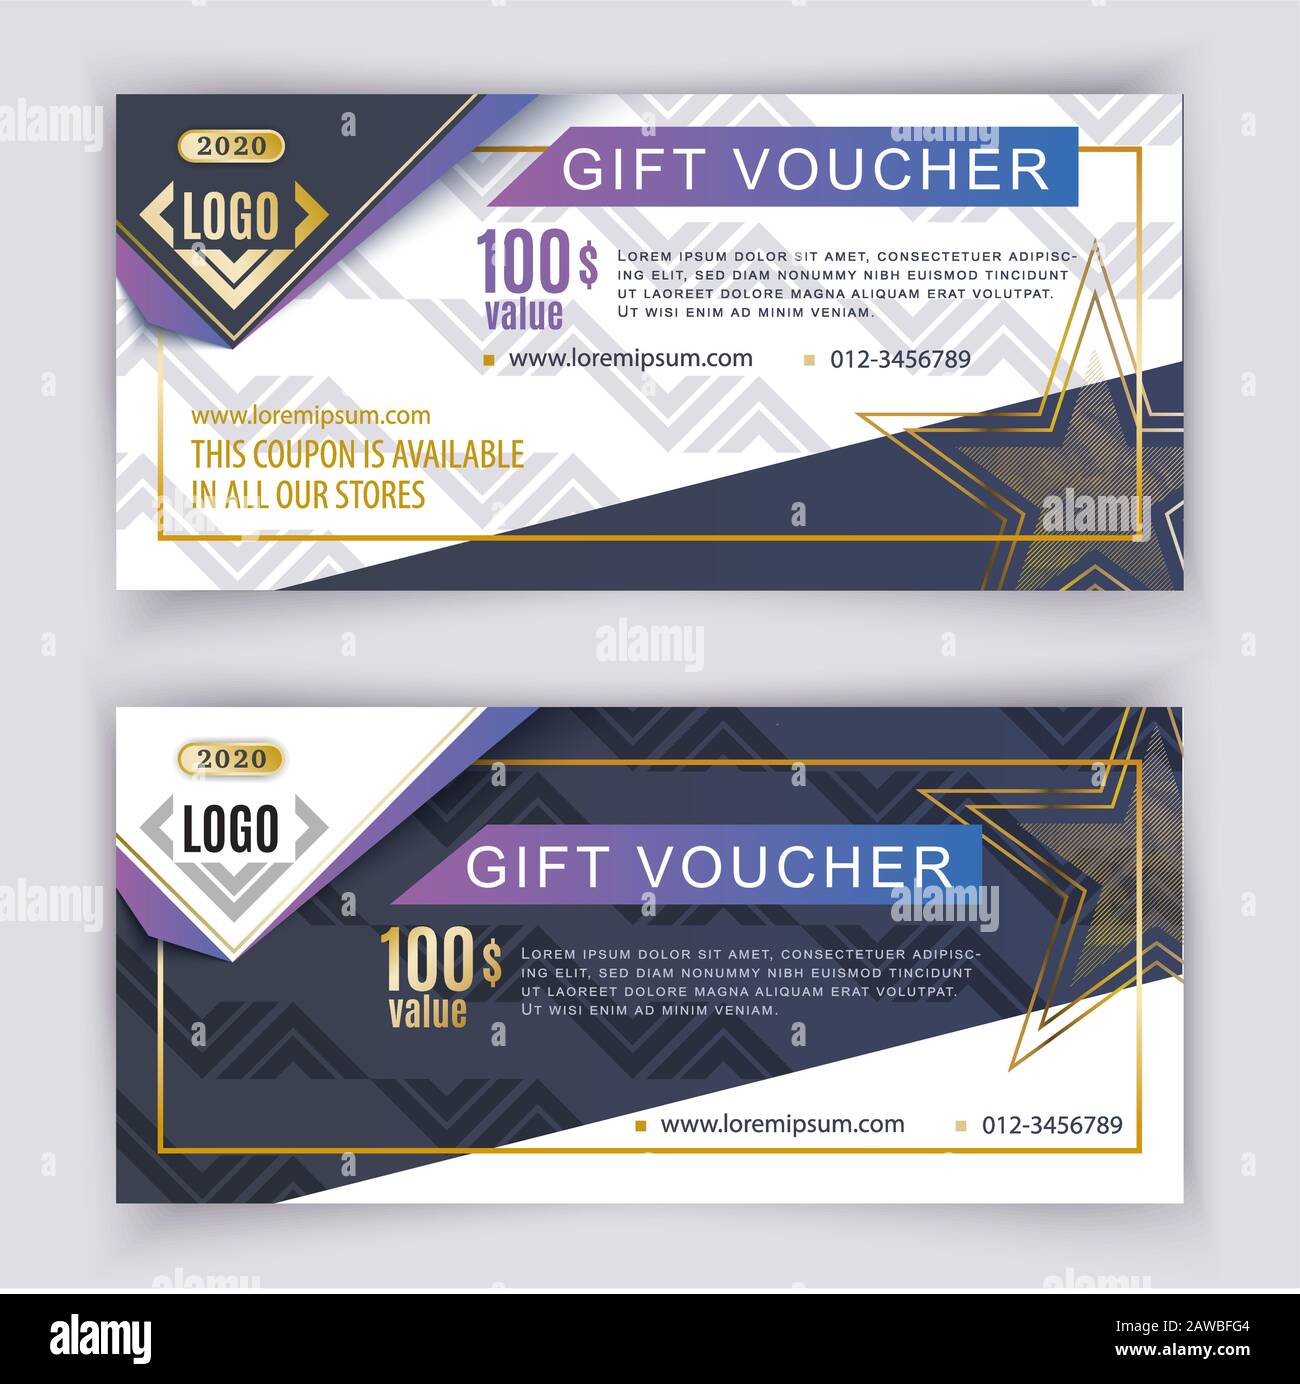 Voucher triangle template. Value 100 dollars for department stores, business, Stock Vector